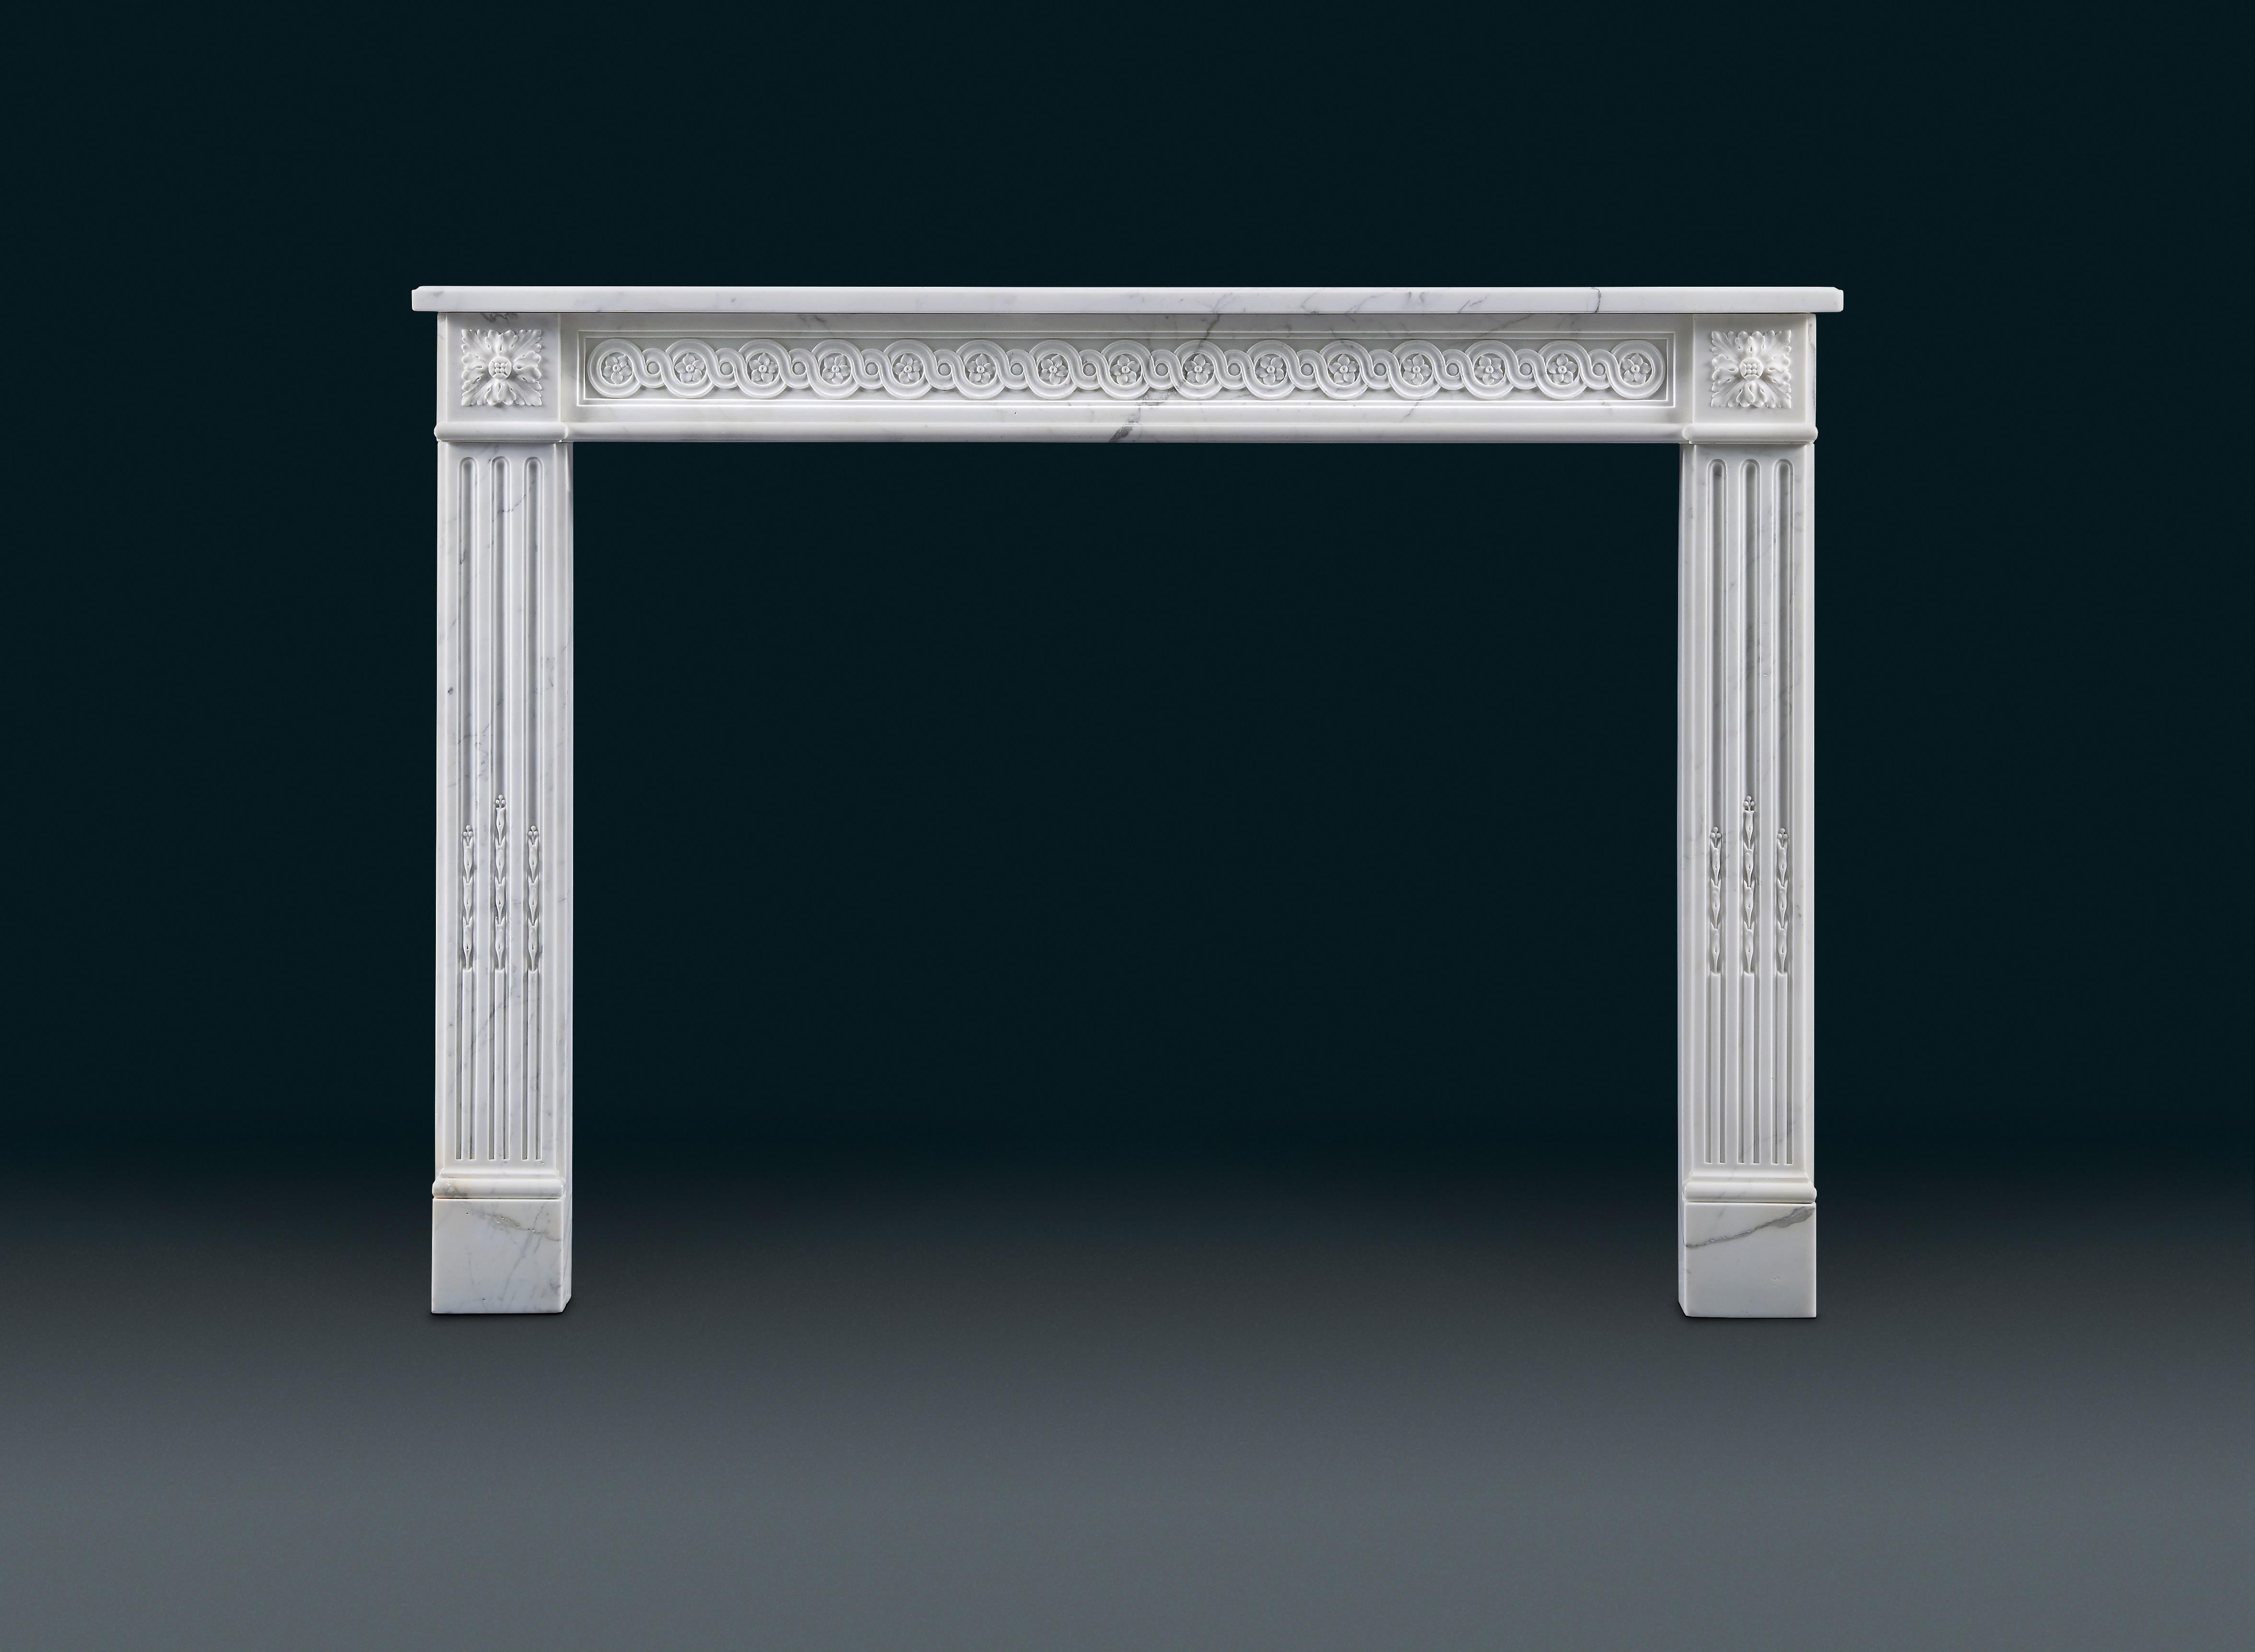 An antique 19th century, French Louis XVI style, veined white marble fireplace with simple rectangular shelf. The panelled frieze decorated with intertwining guilloche centred with flowers, the jambs with three stopped flutes surmounted by scalloped